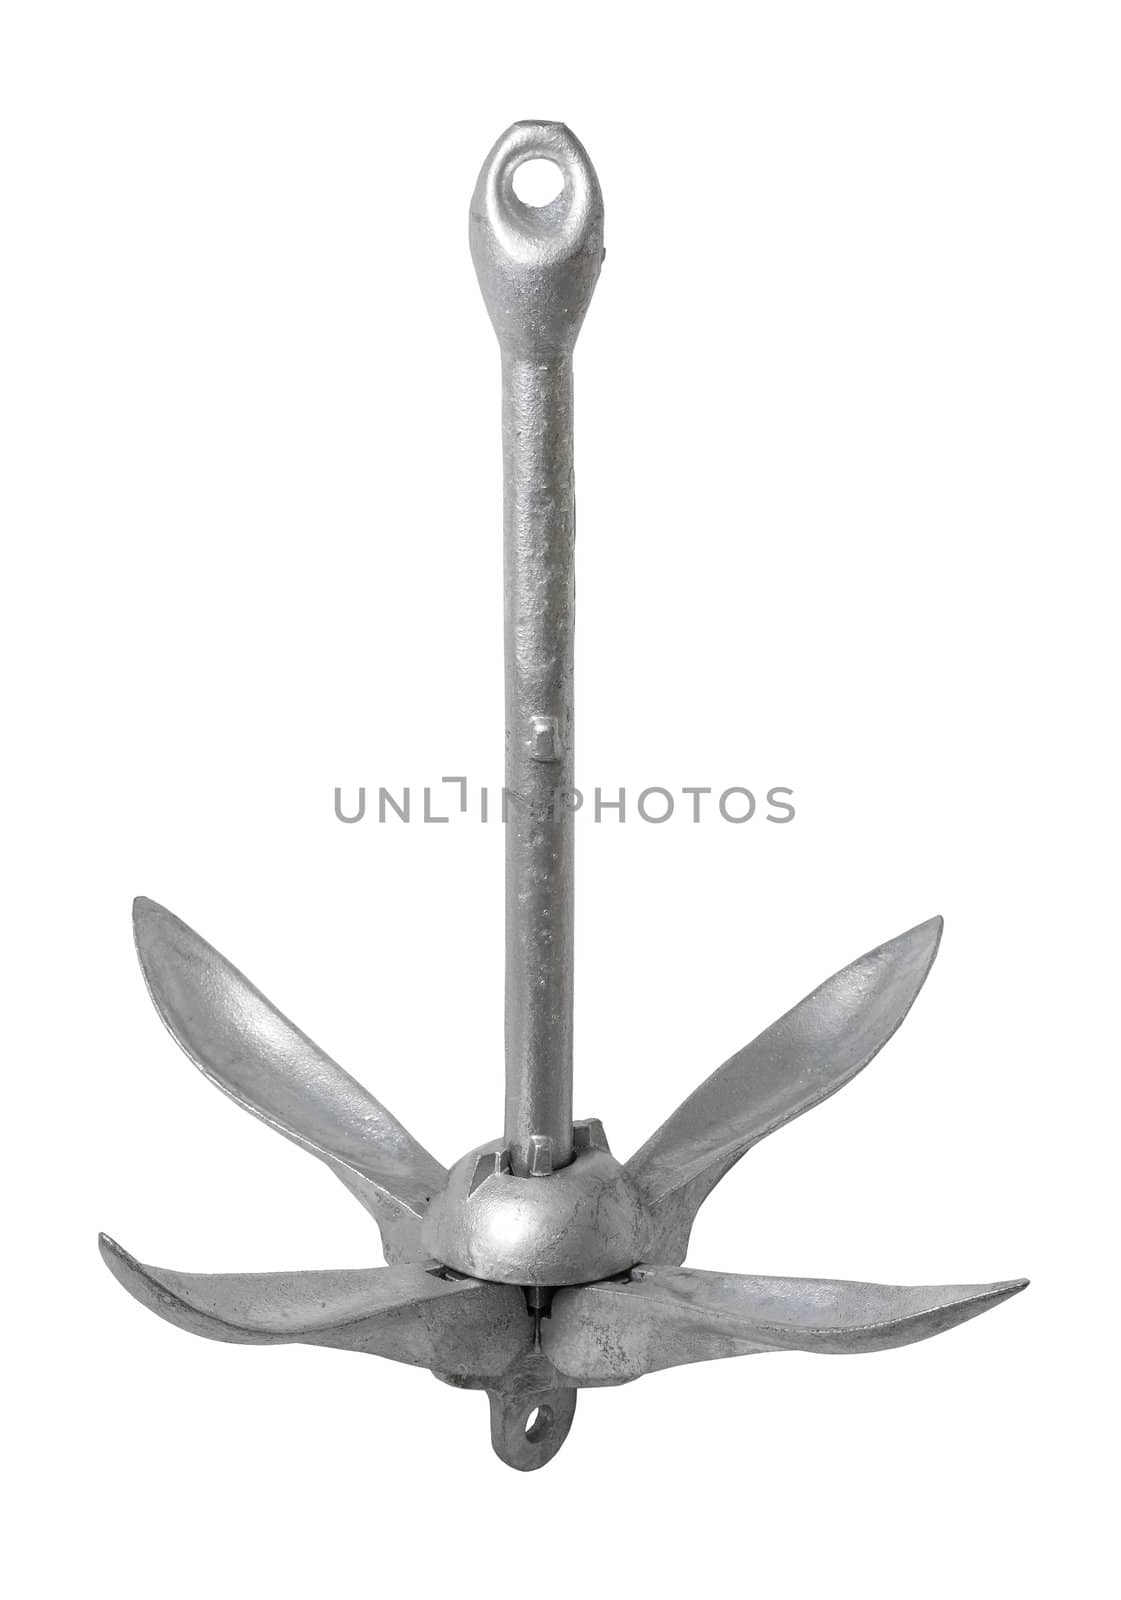 Small 4kg (9 lbs) folding grapnel boat anchor isolated on white